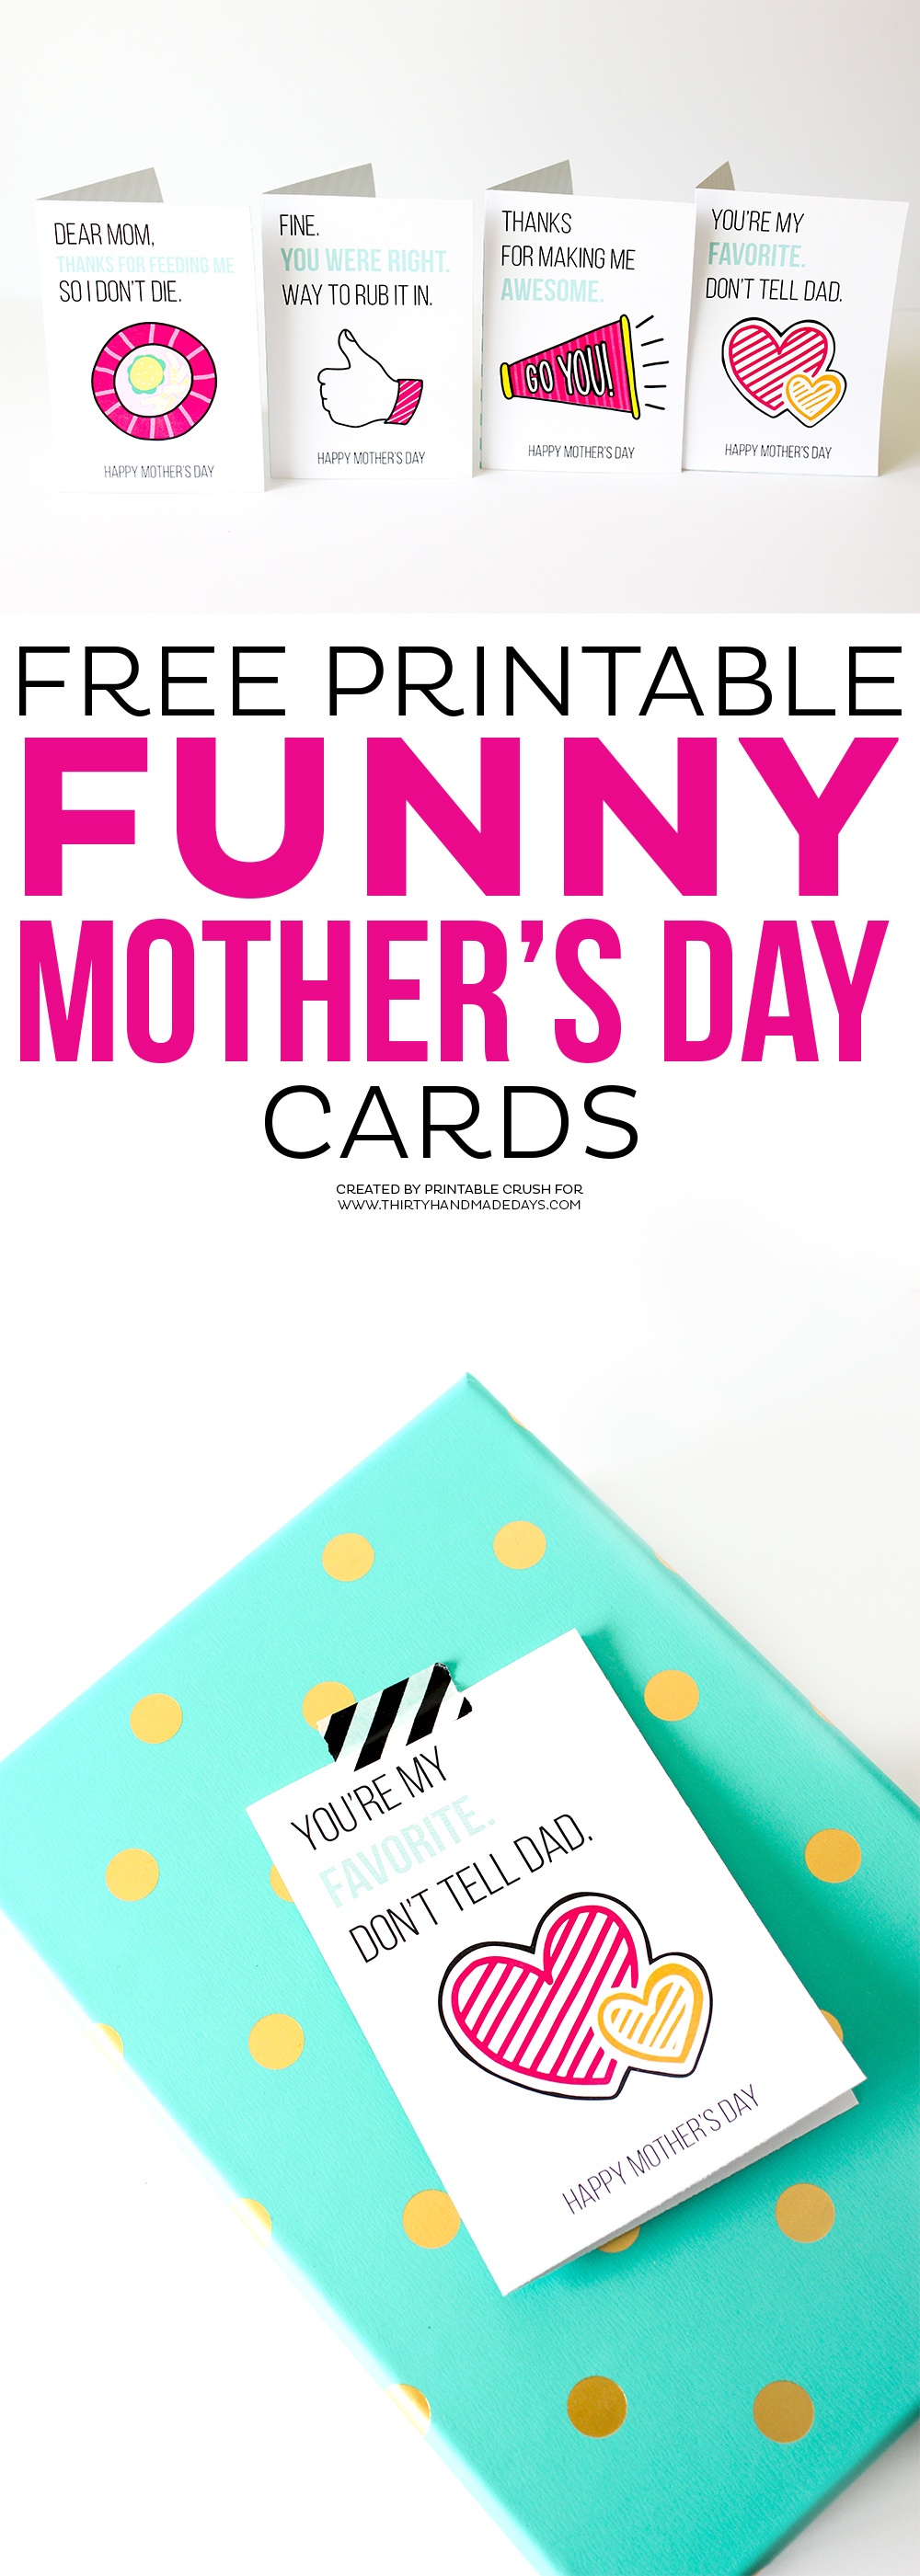 Printable Mother&amp;#039;s Day Cards - Free Printable Funny Mother&amp;amp;#039;s Day Cards